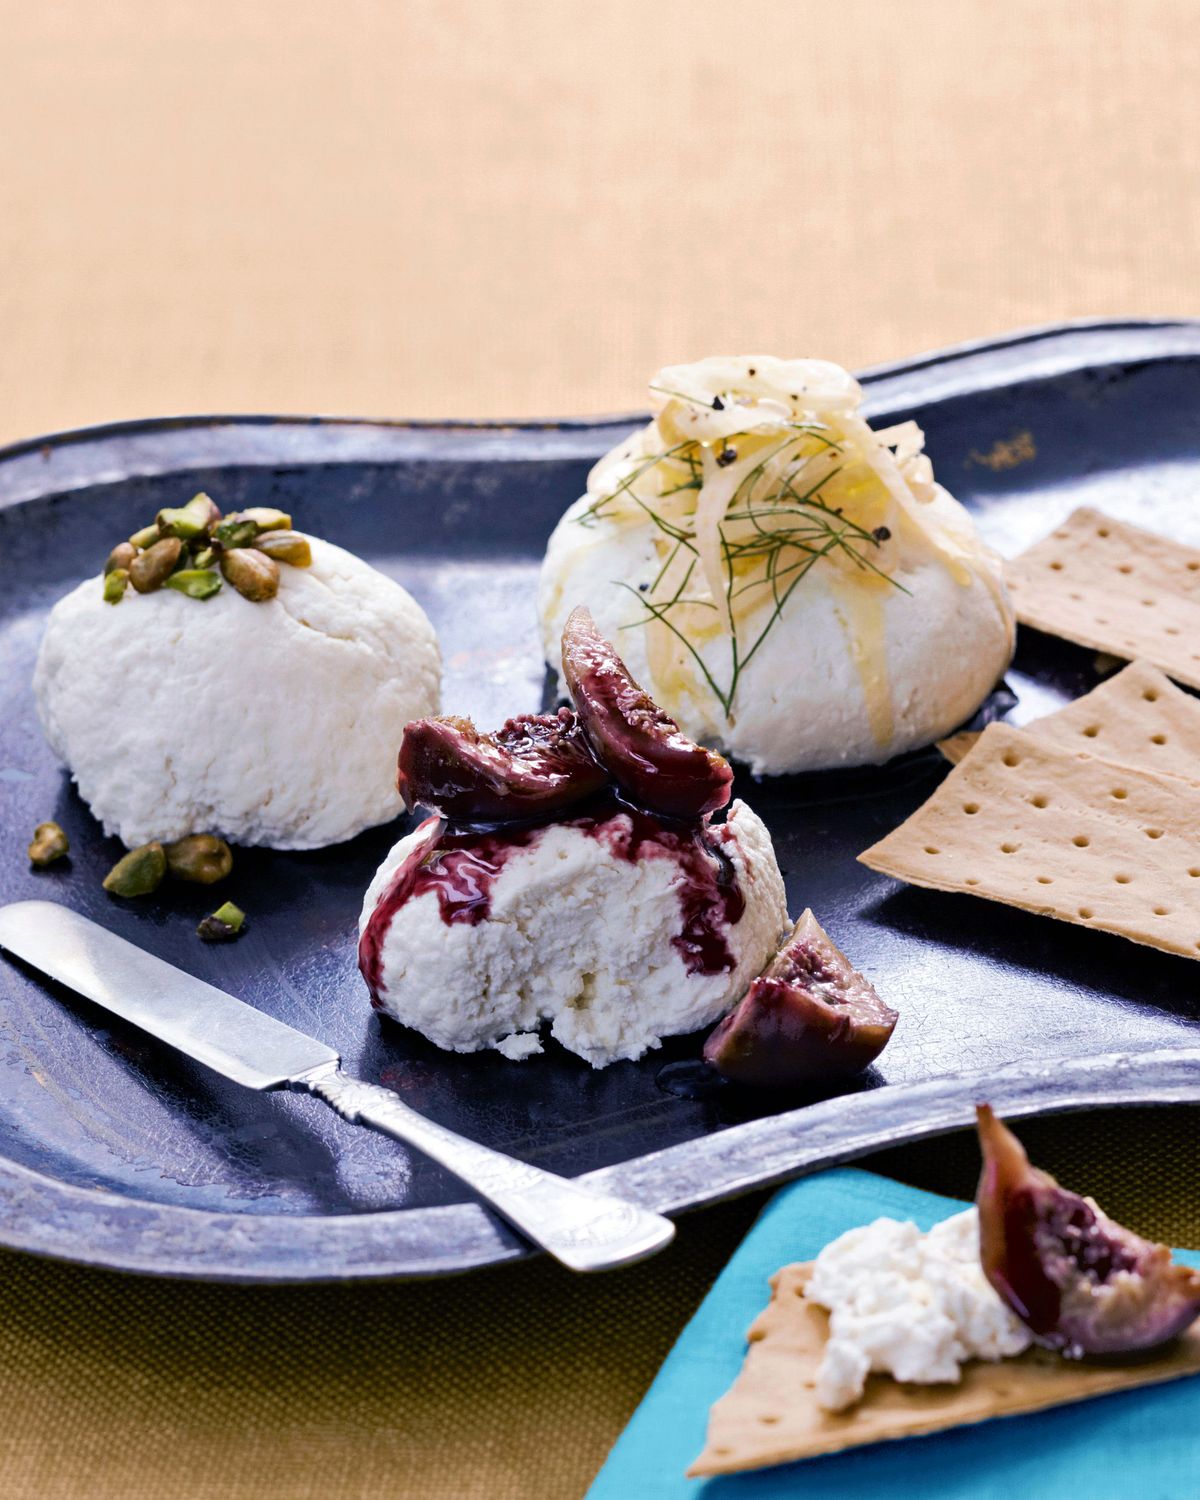 buttermilk fresh cheese with spiced figs, pickled fennel, and pistachio